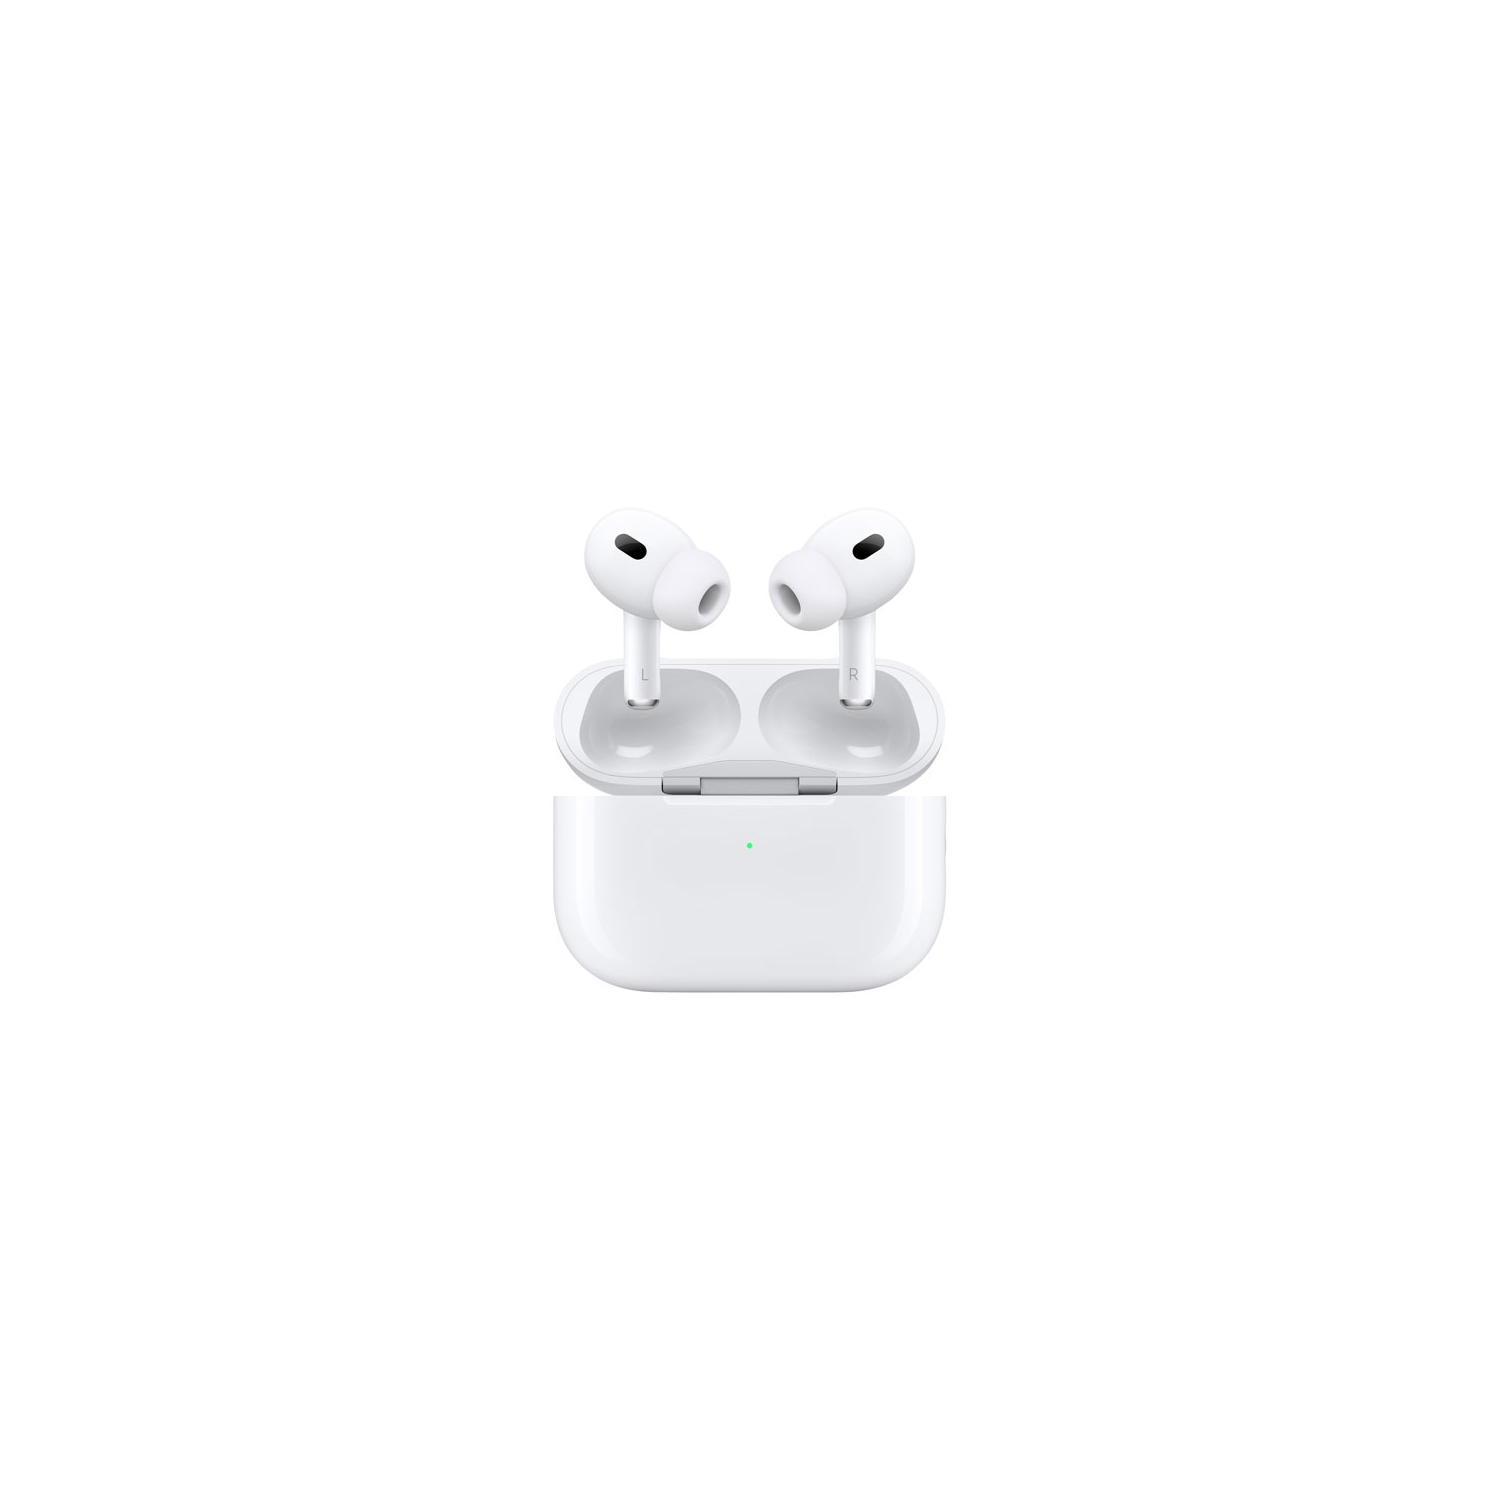 Refurbished (Excellent) - Apple AirPods Pro (2nd generation) In-Ear Noise Cancelling True Wireless Earbuds - White